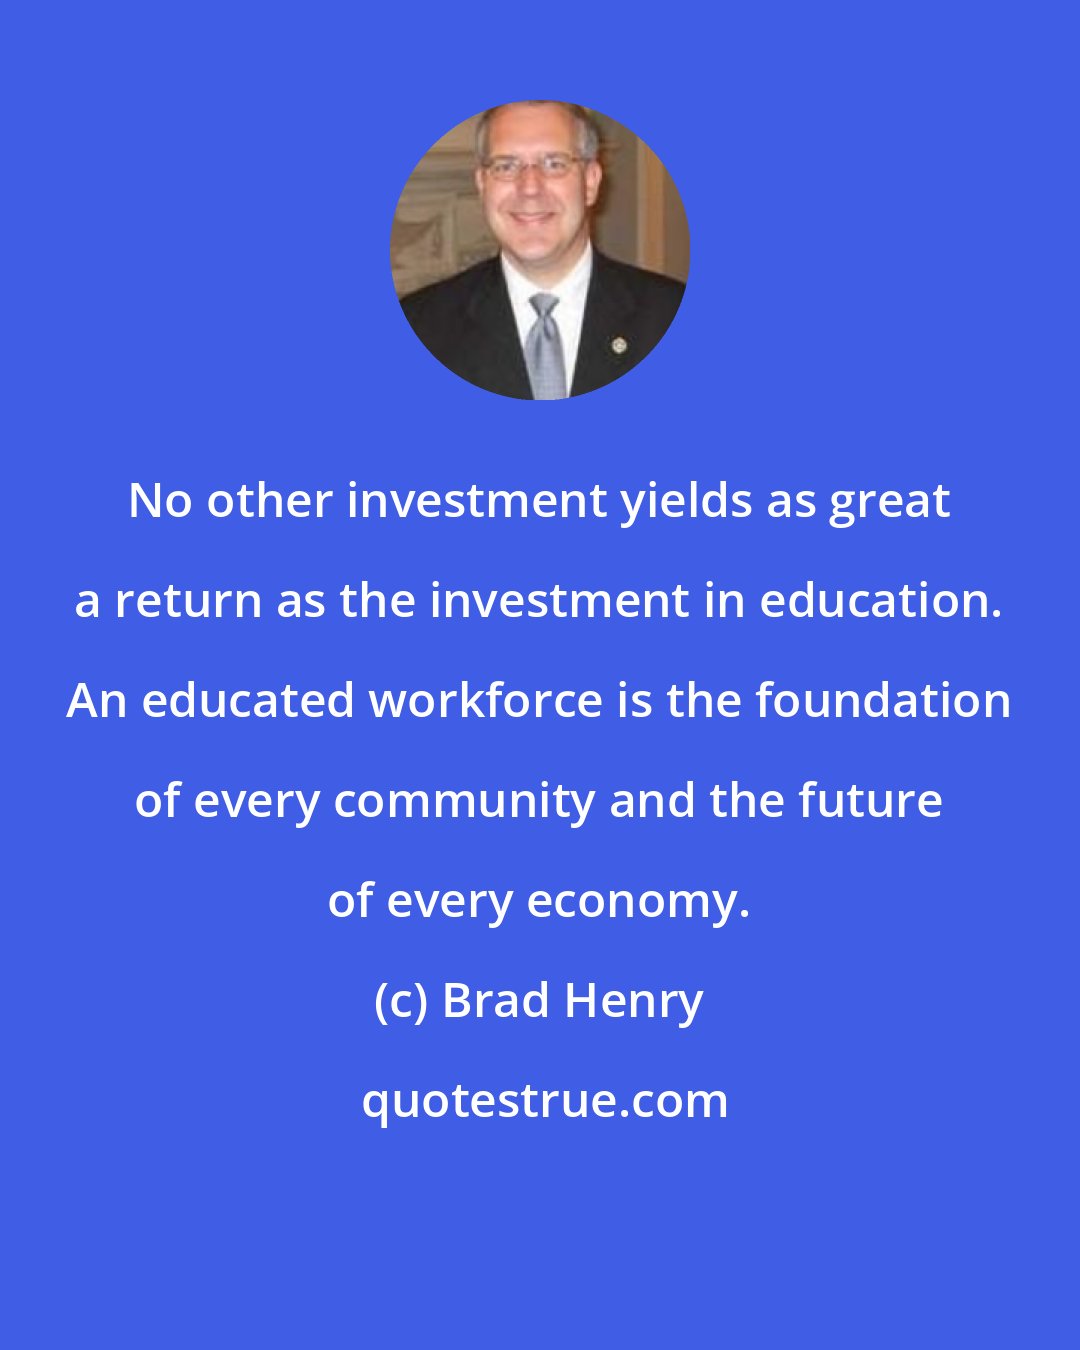 Brad Henry: No other investment yields as great a return as the investment in education. An educated workforce is the foundation of every community and the future of every economy.